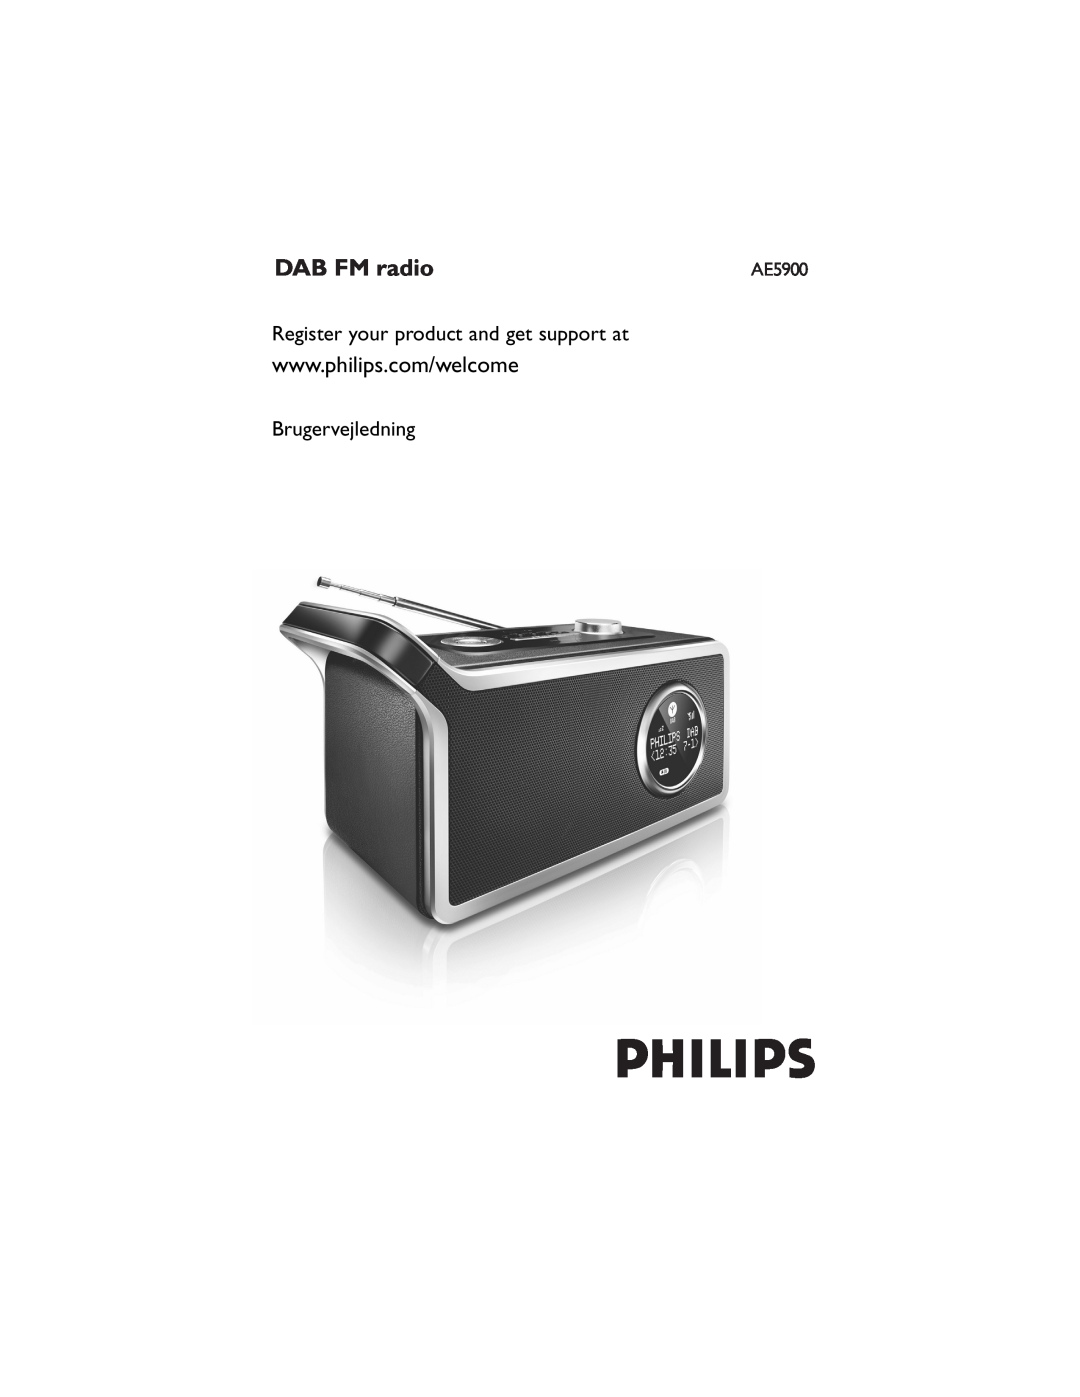 Philips AE5900 user manual Brugervejledning, DAB FM radio, Register your product and get support at 